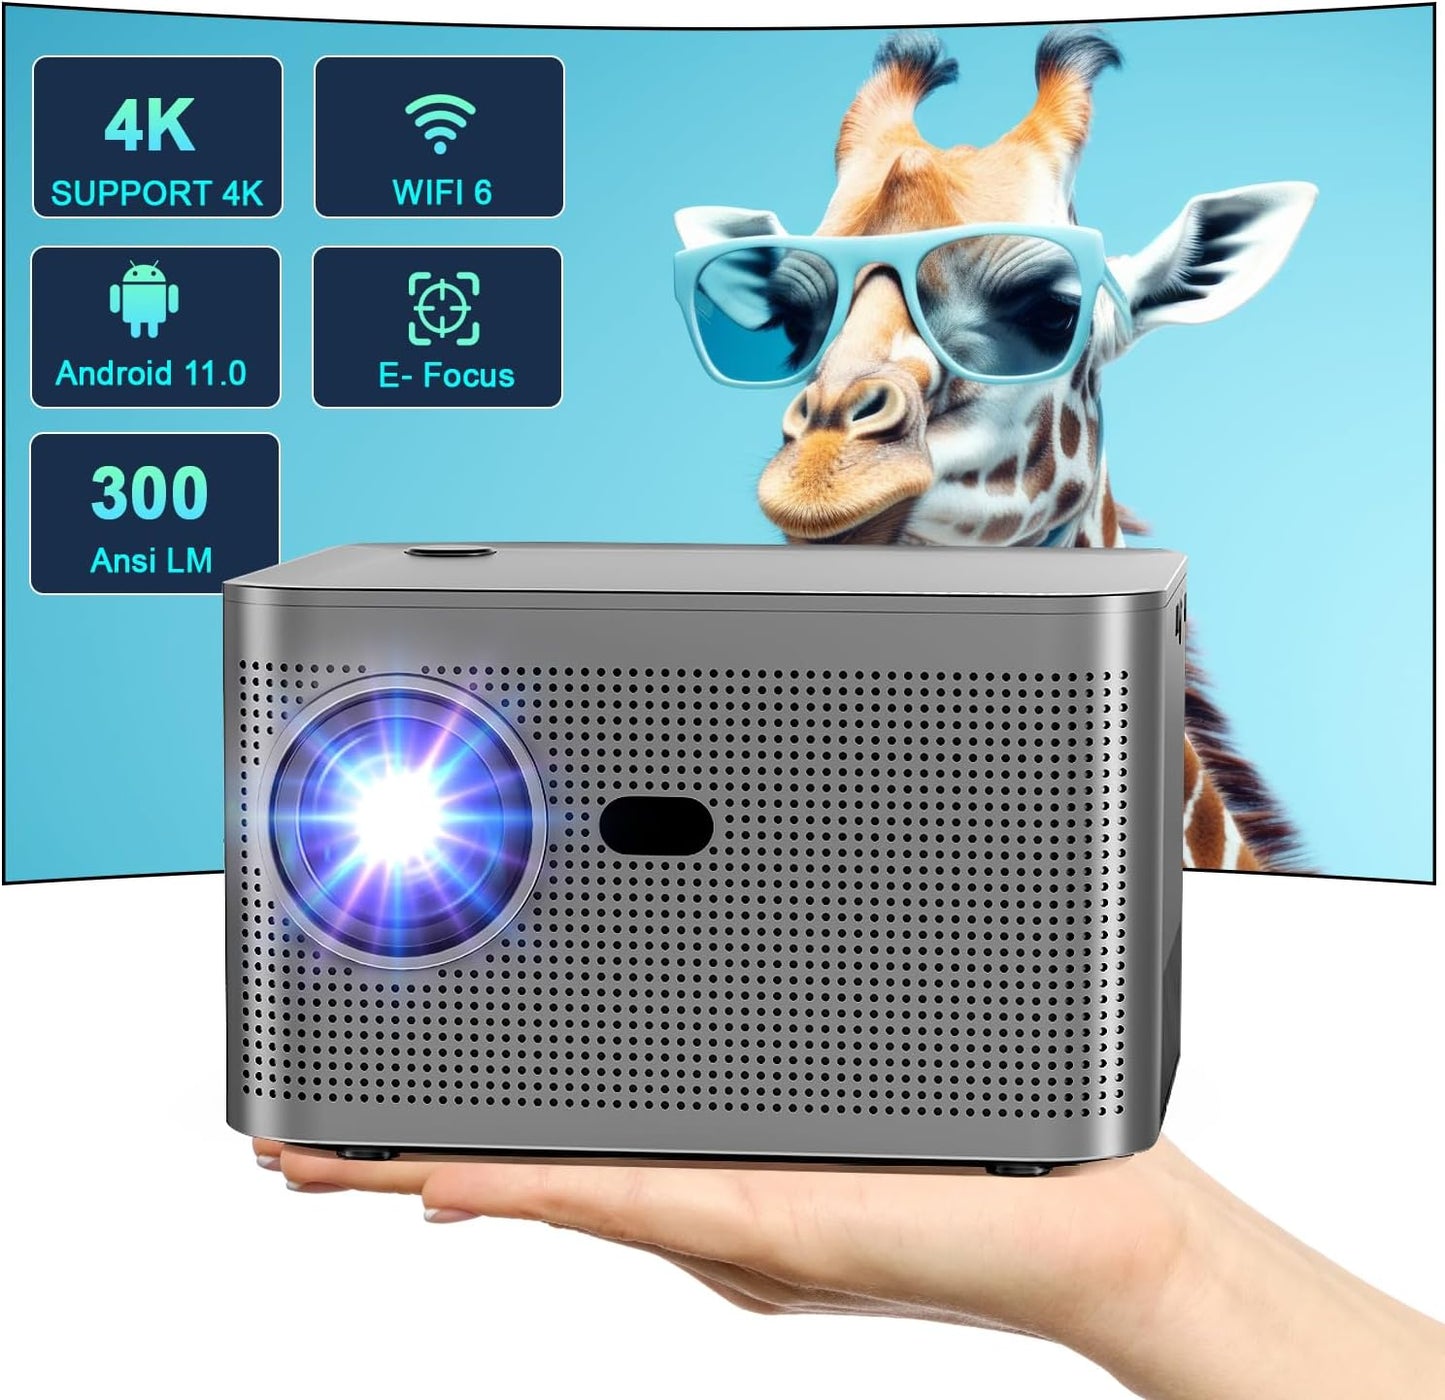 HY350 Keystone Correction Mini Projector, 4K 1080P Full HD Support 580 ANSI Smart Projector with WiFi6, BT 5.0, 150 Inch Screen, Portable Built-in Android OS 11.0 Home Theater Projector - MAGCUBIC